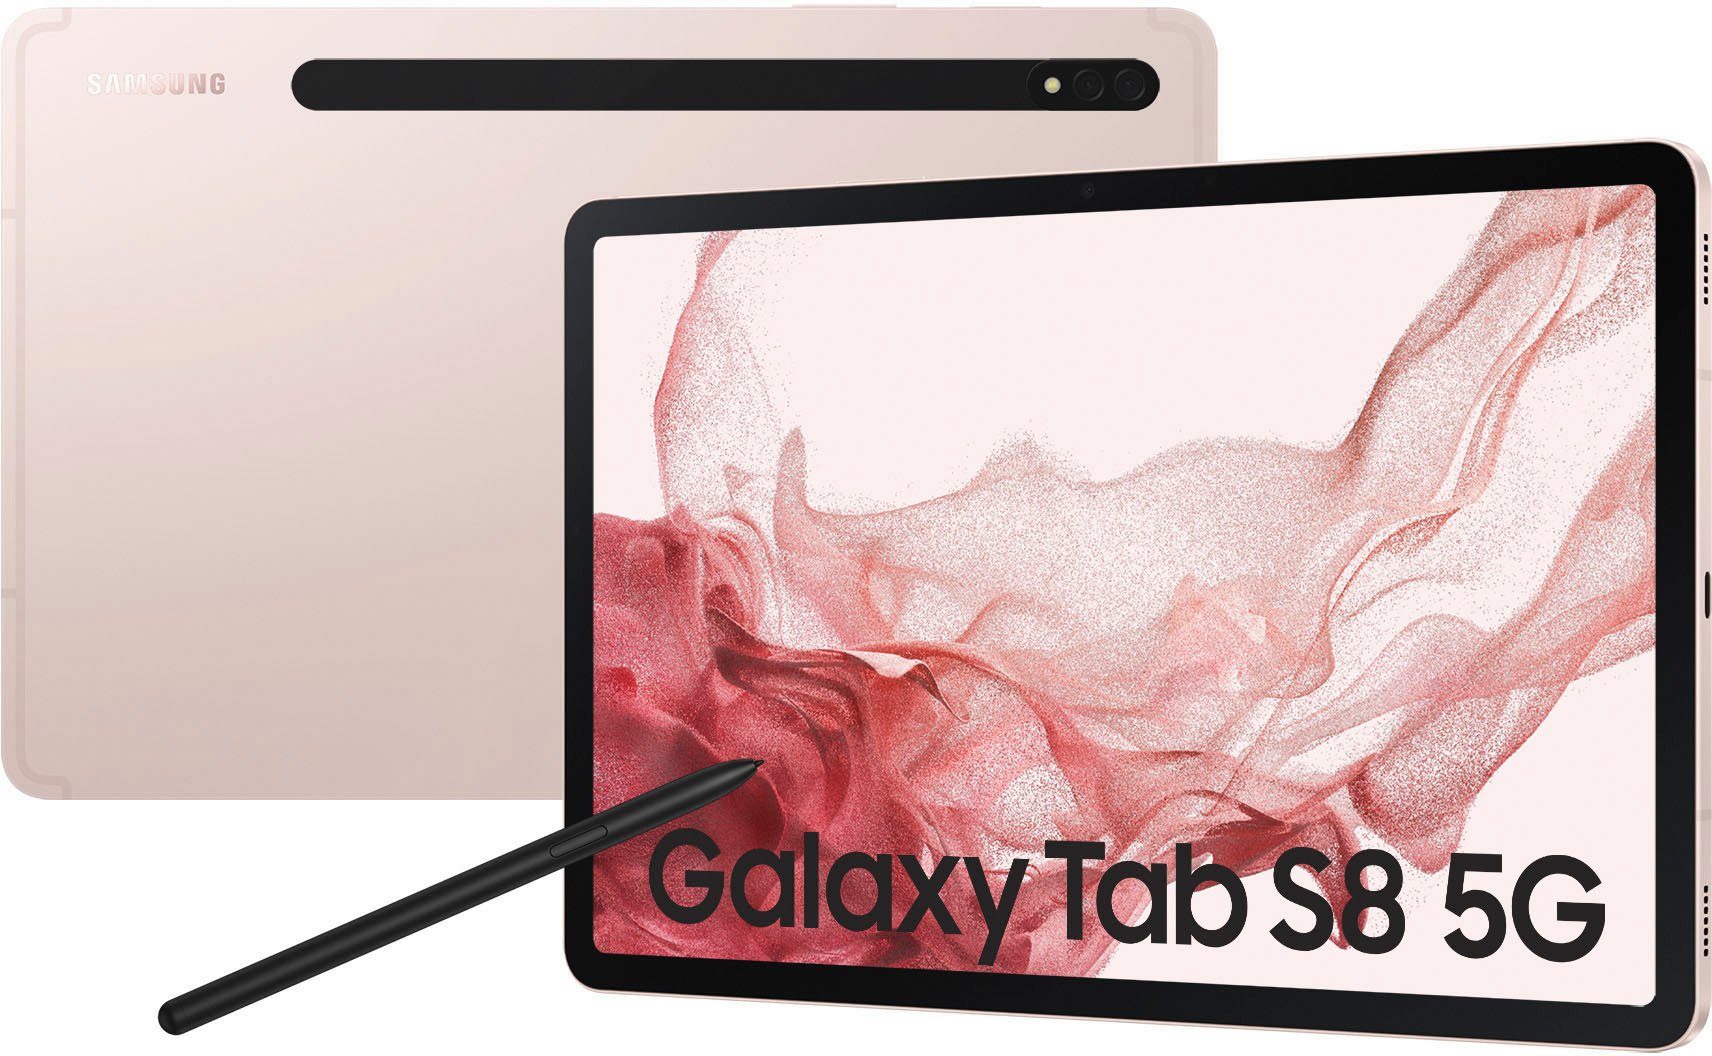 Samsung Galaxy Tab S8 5G Pink Gold 128 Android, (11", GB, 5G) Tablet